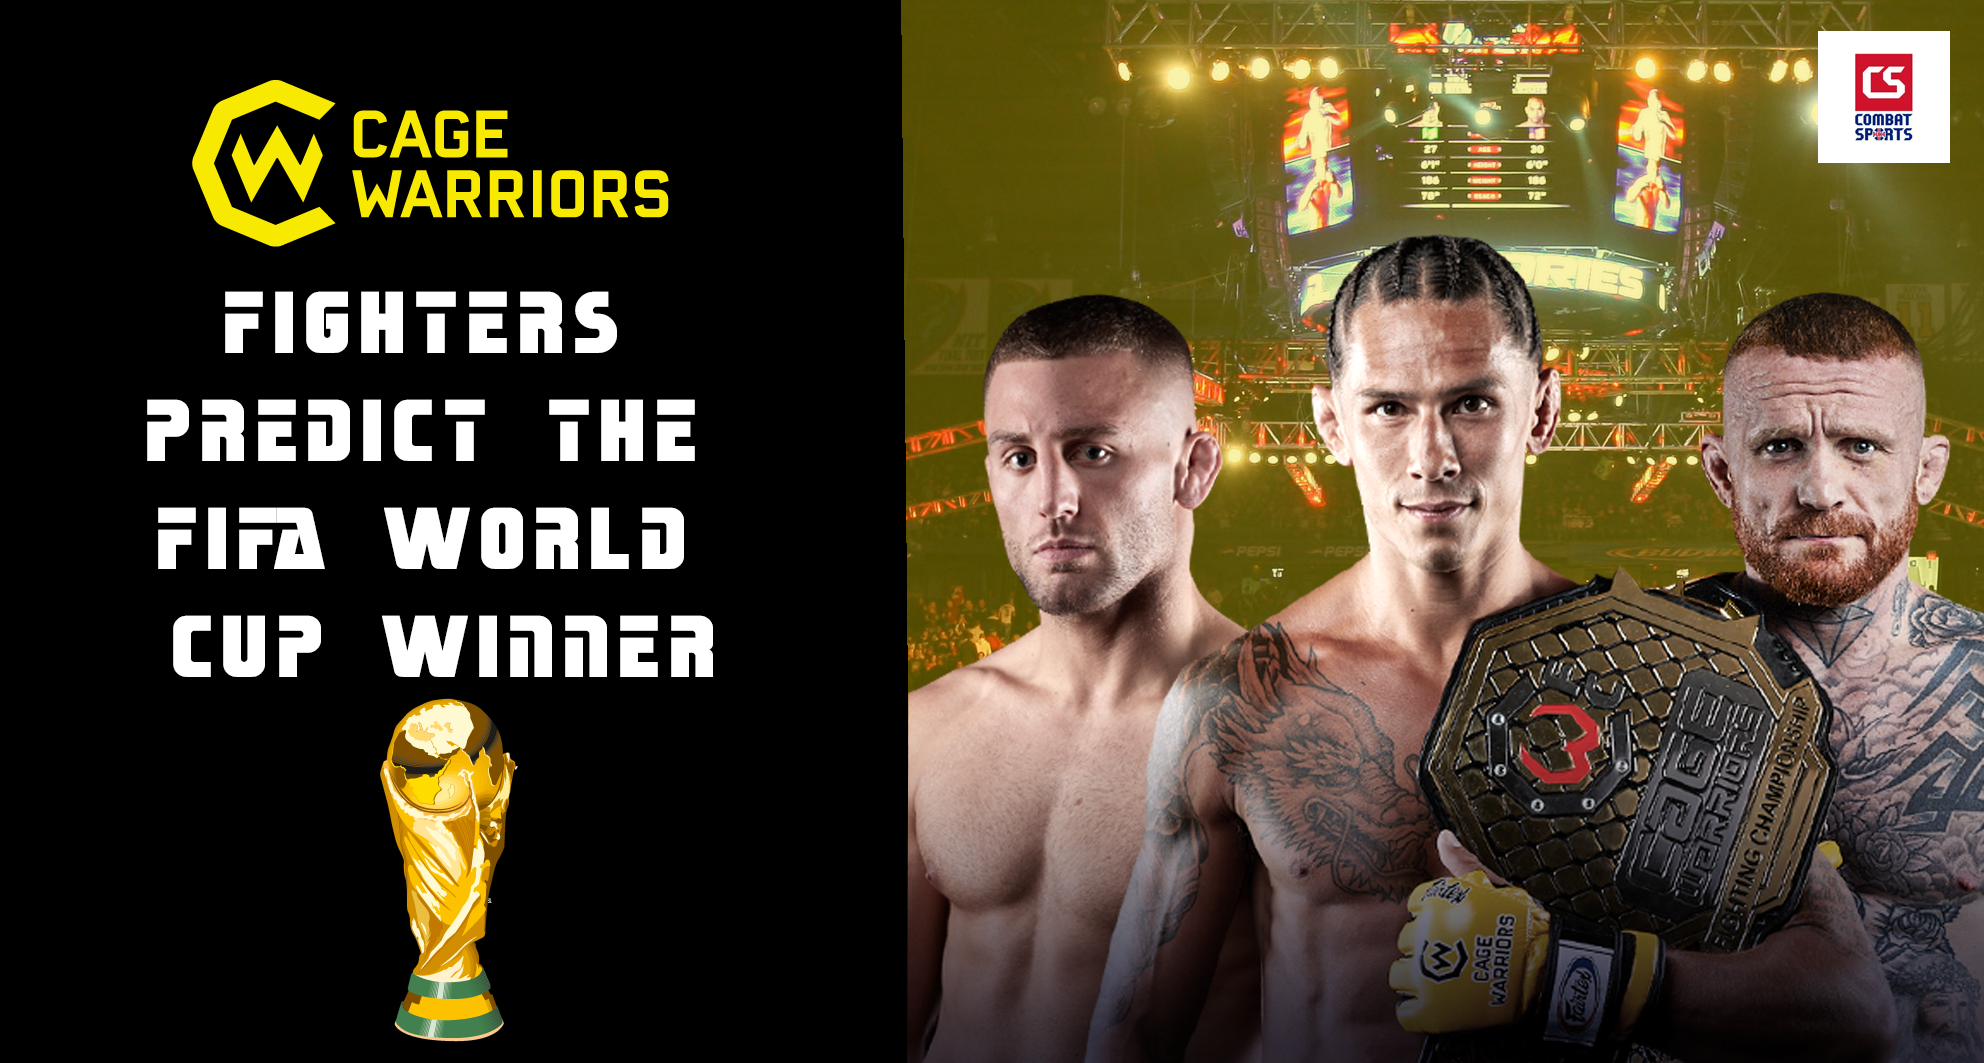 Cage Warriors Fighters Predict FIFA World Cup Winner